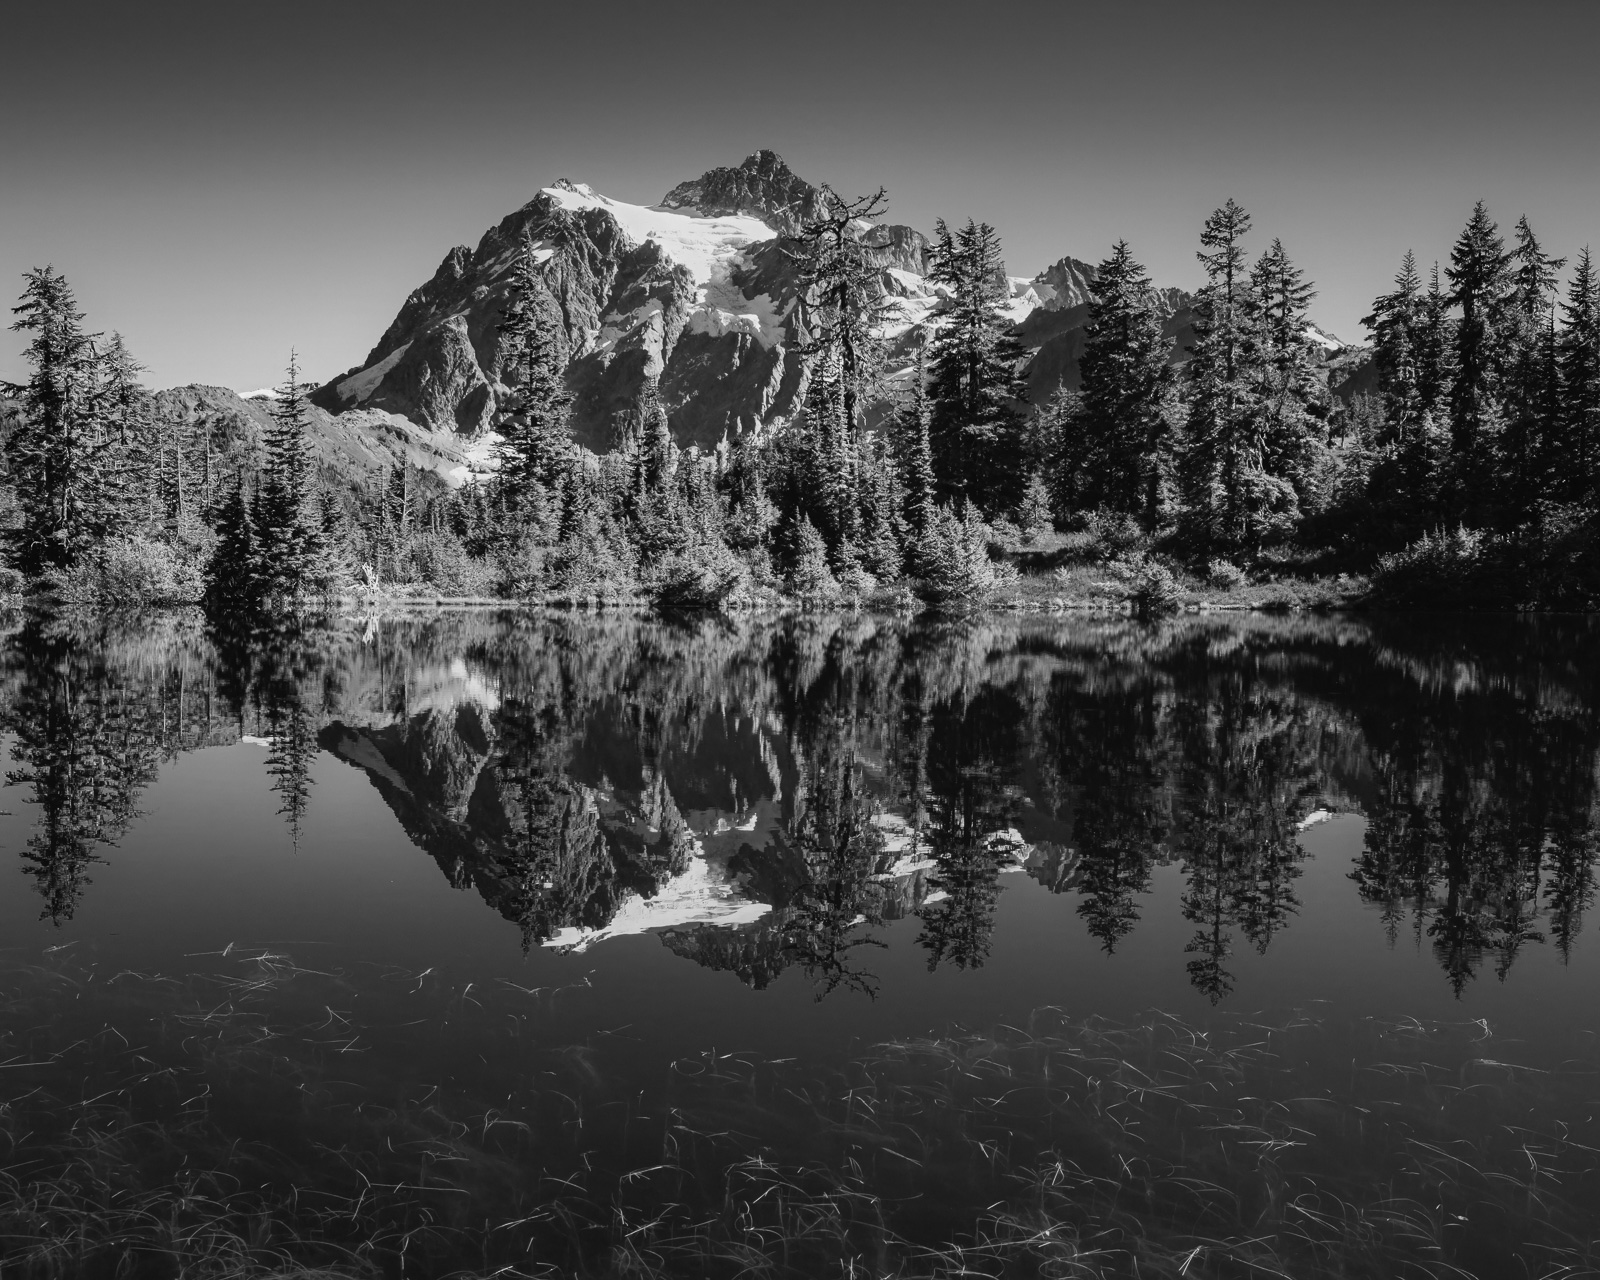 A fine art black and white photograph of Mount Shuksan in the reflection of Picture Lake near Mount Baker Ski Area, Washington.